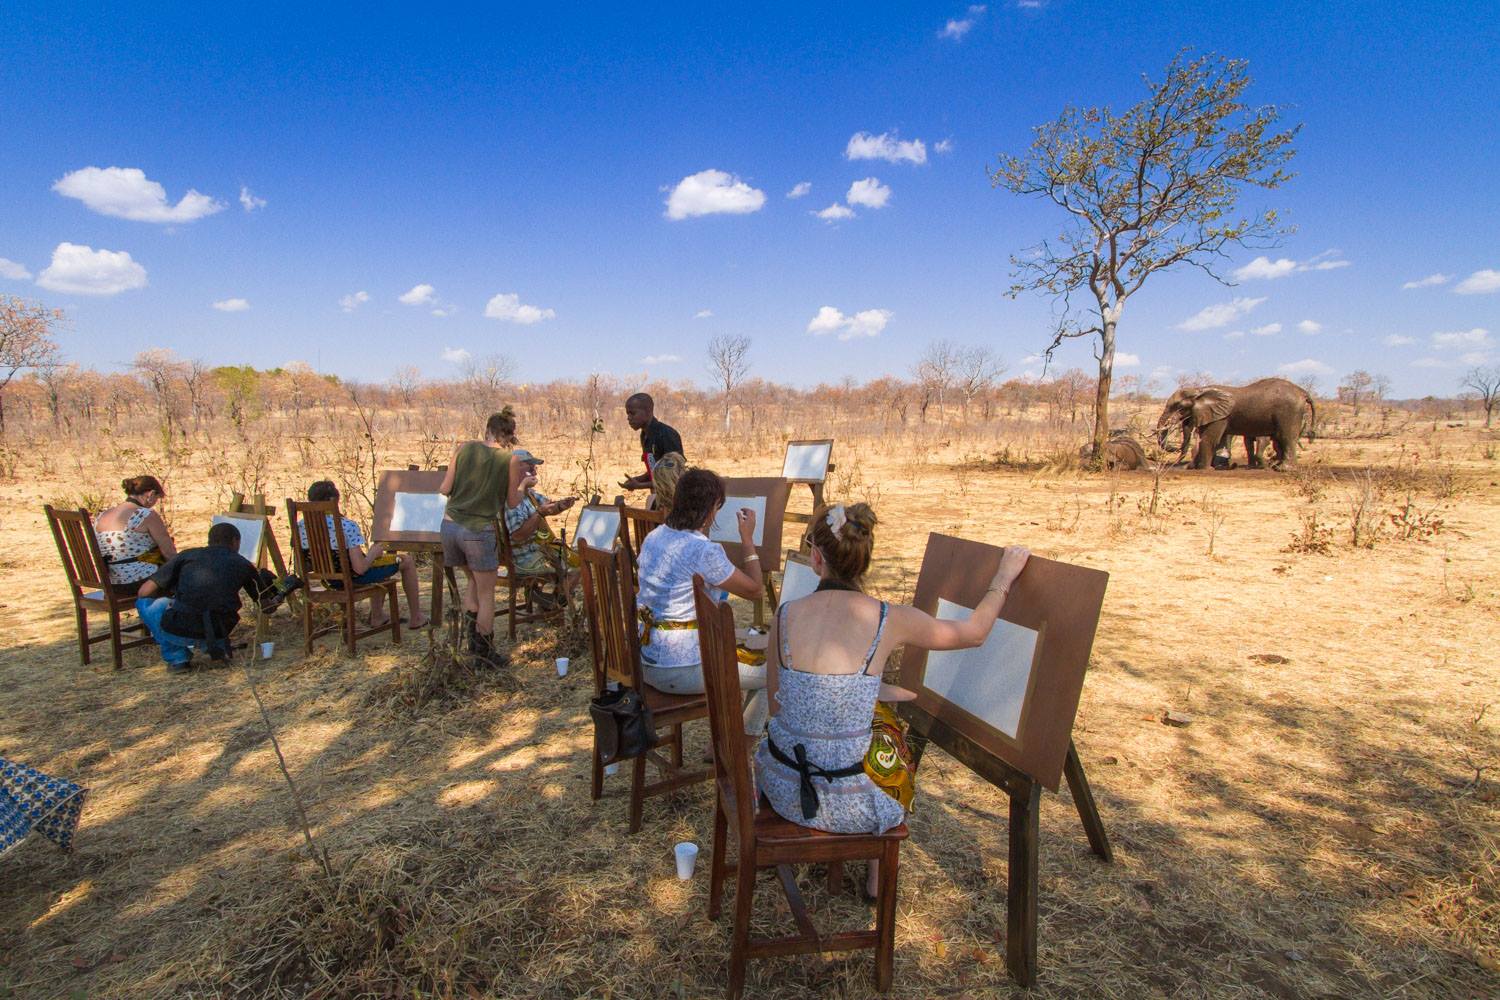 A hands-off elephant experience in Victoria Falls